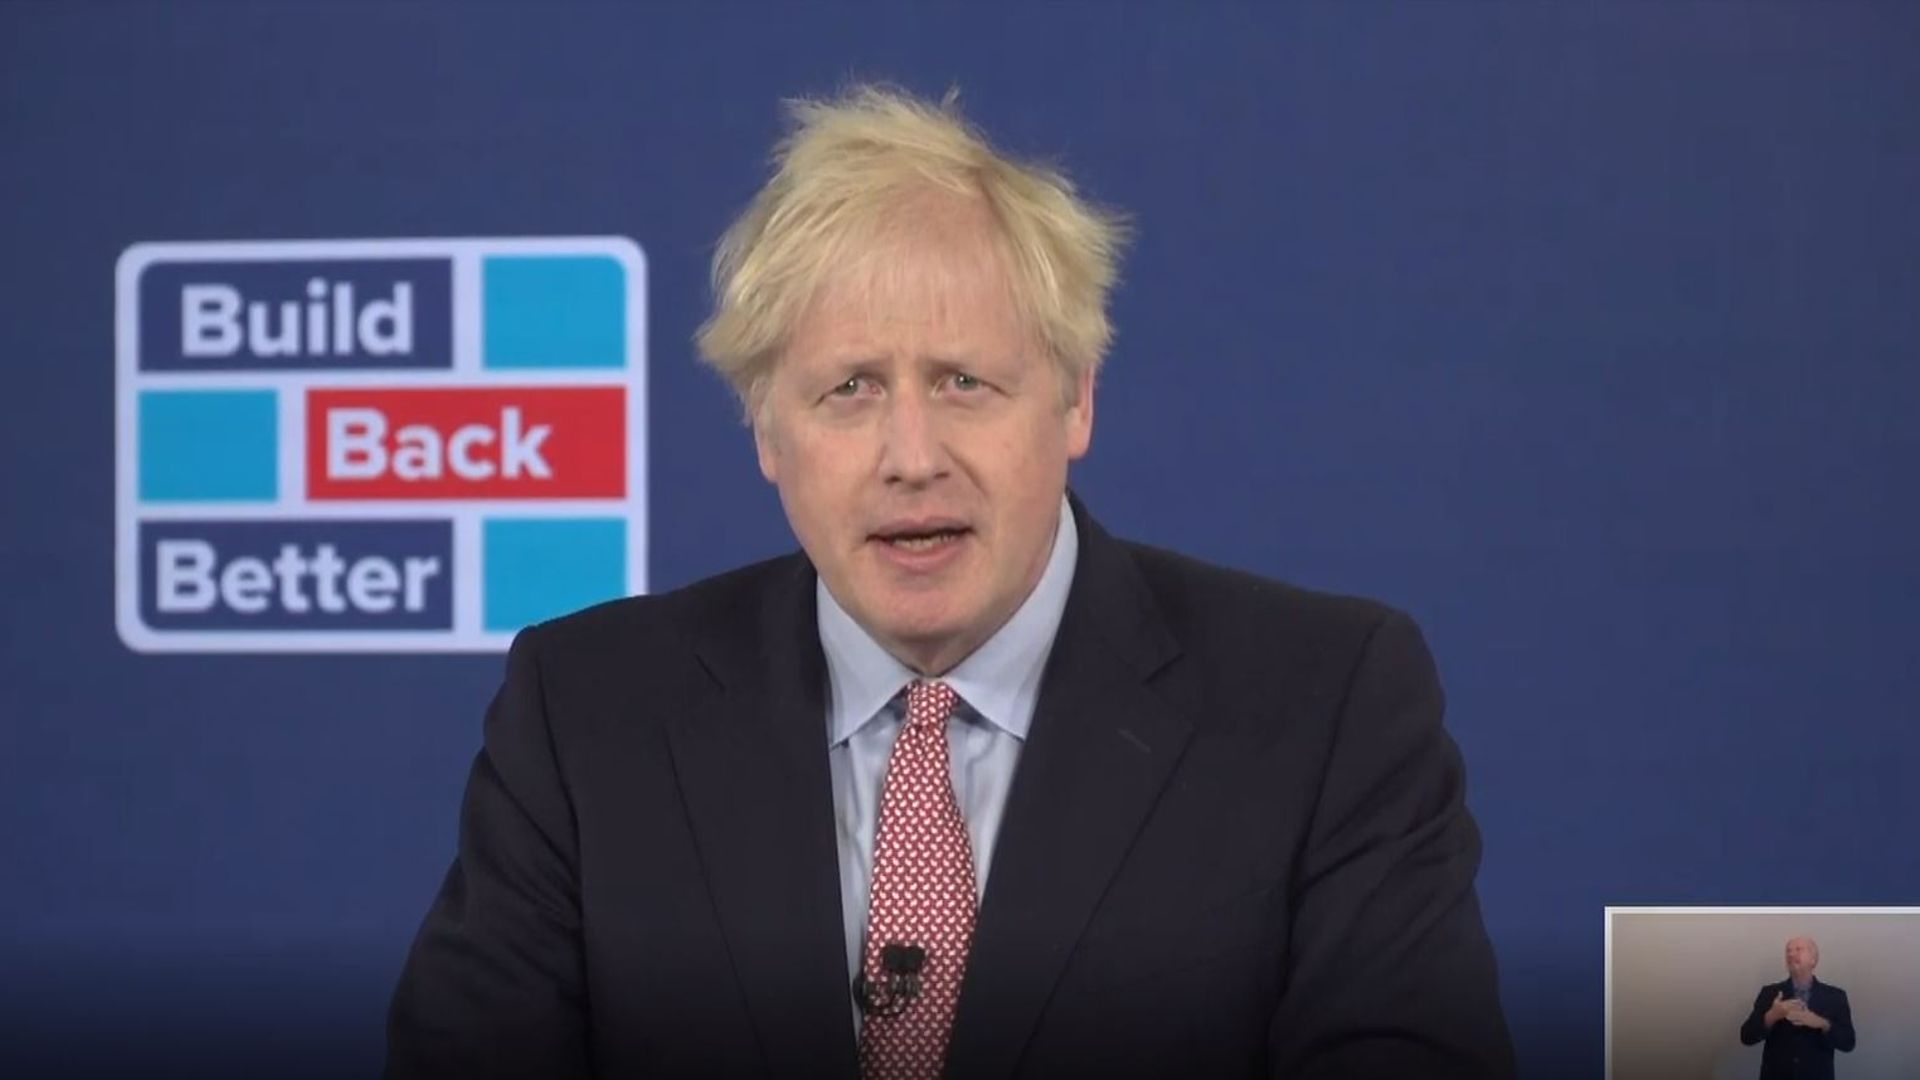 Prime Minister Boris Johnson delivers his address to the virtual Conservative Party Conference - Credit: PA